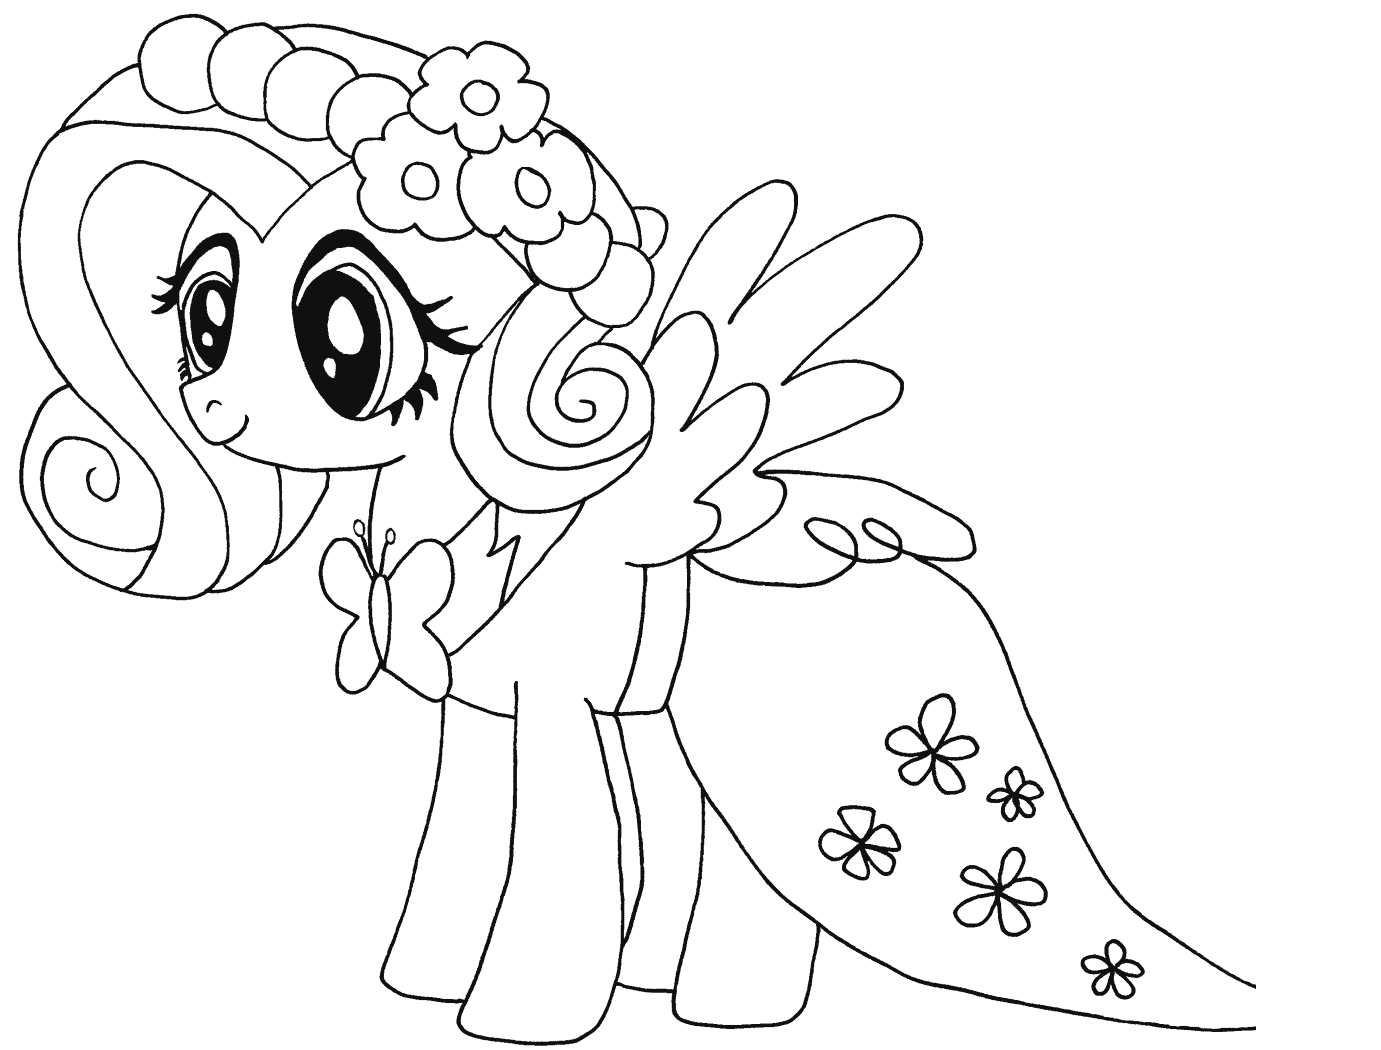 Cute Fluttershy My Little Pony Coloring Pages   Coloring Cool